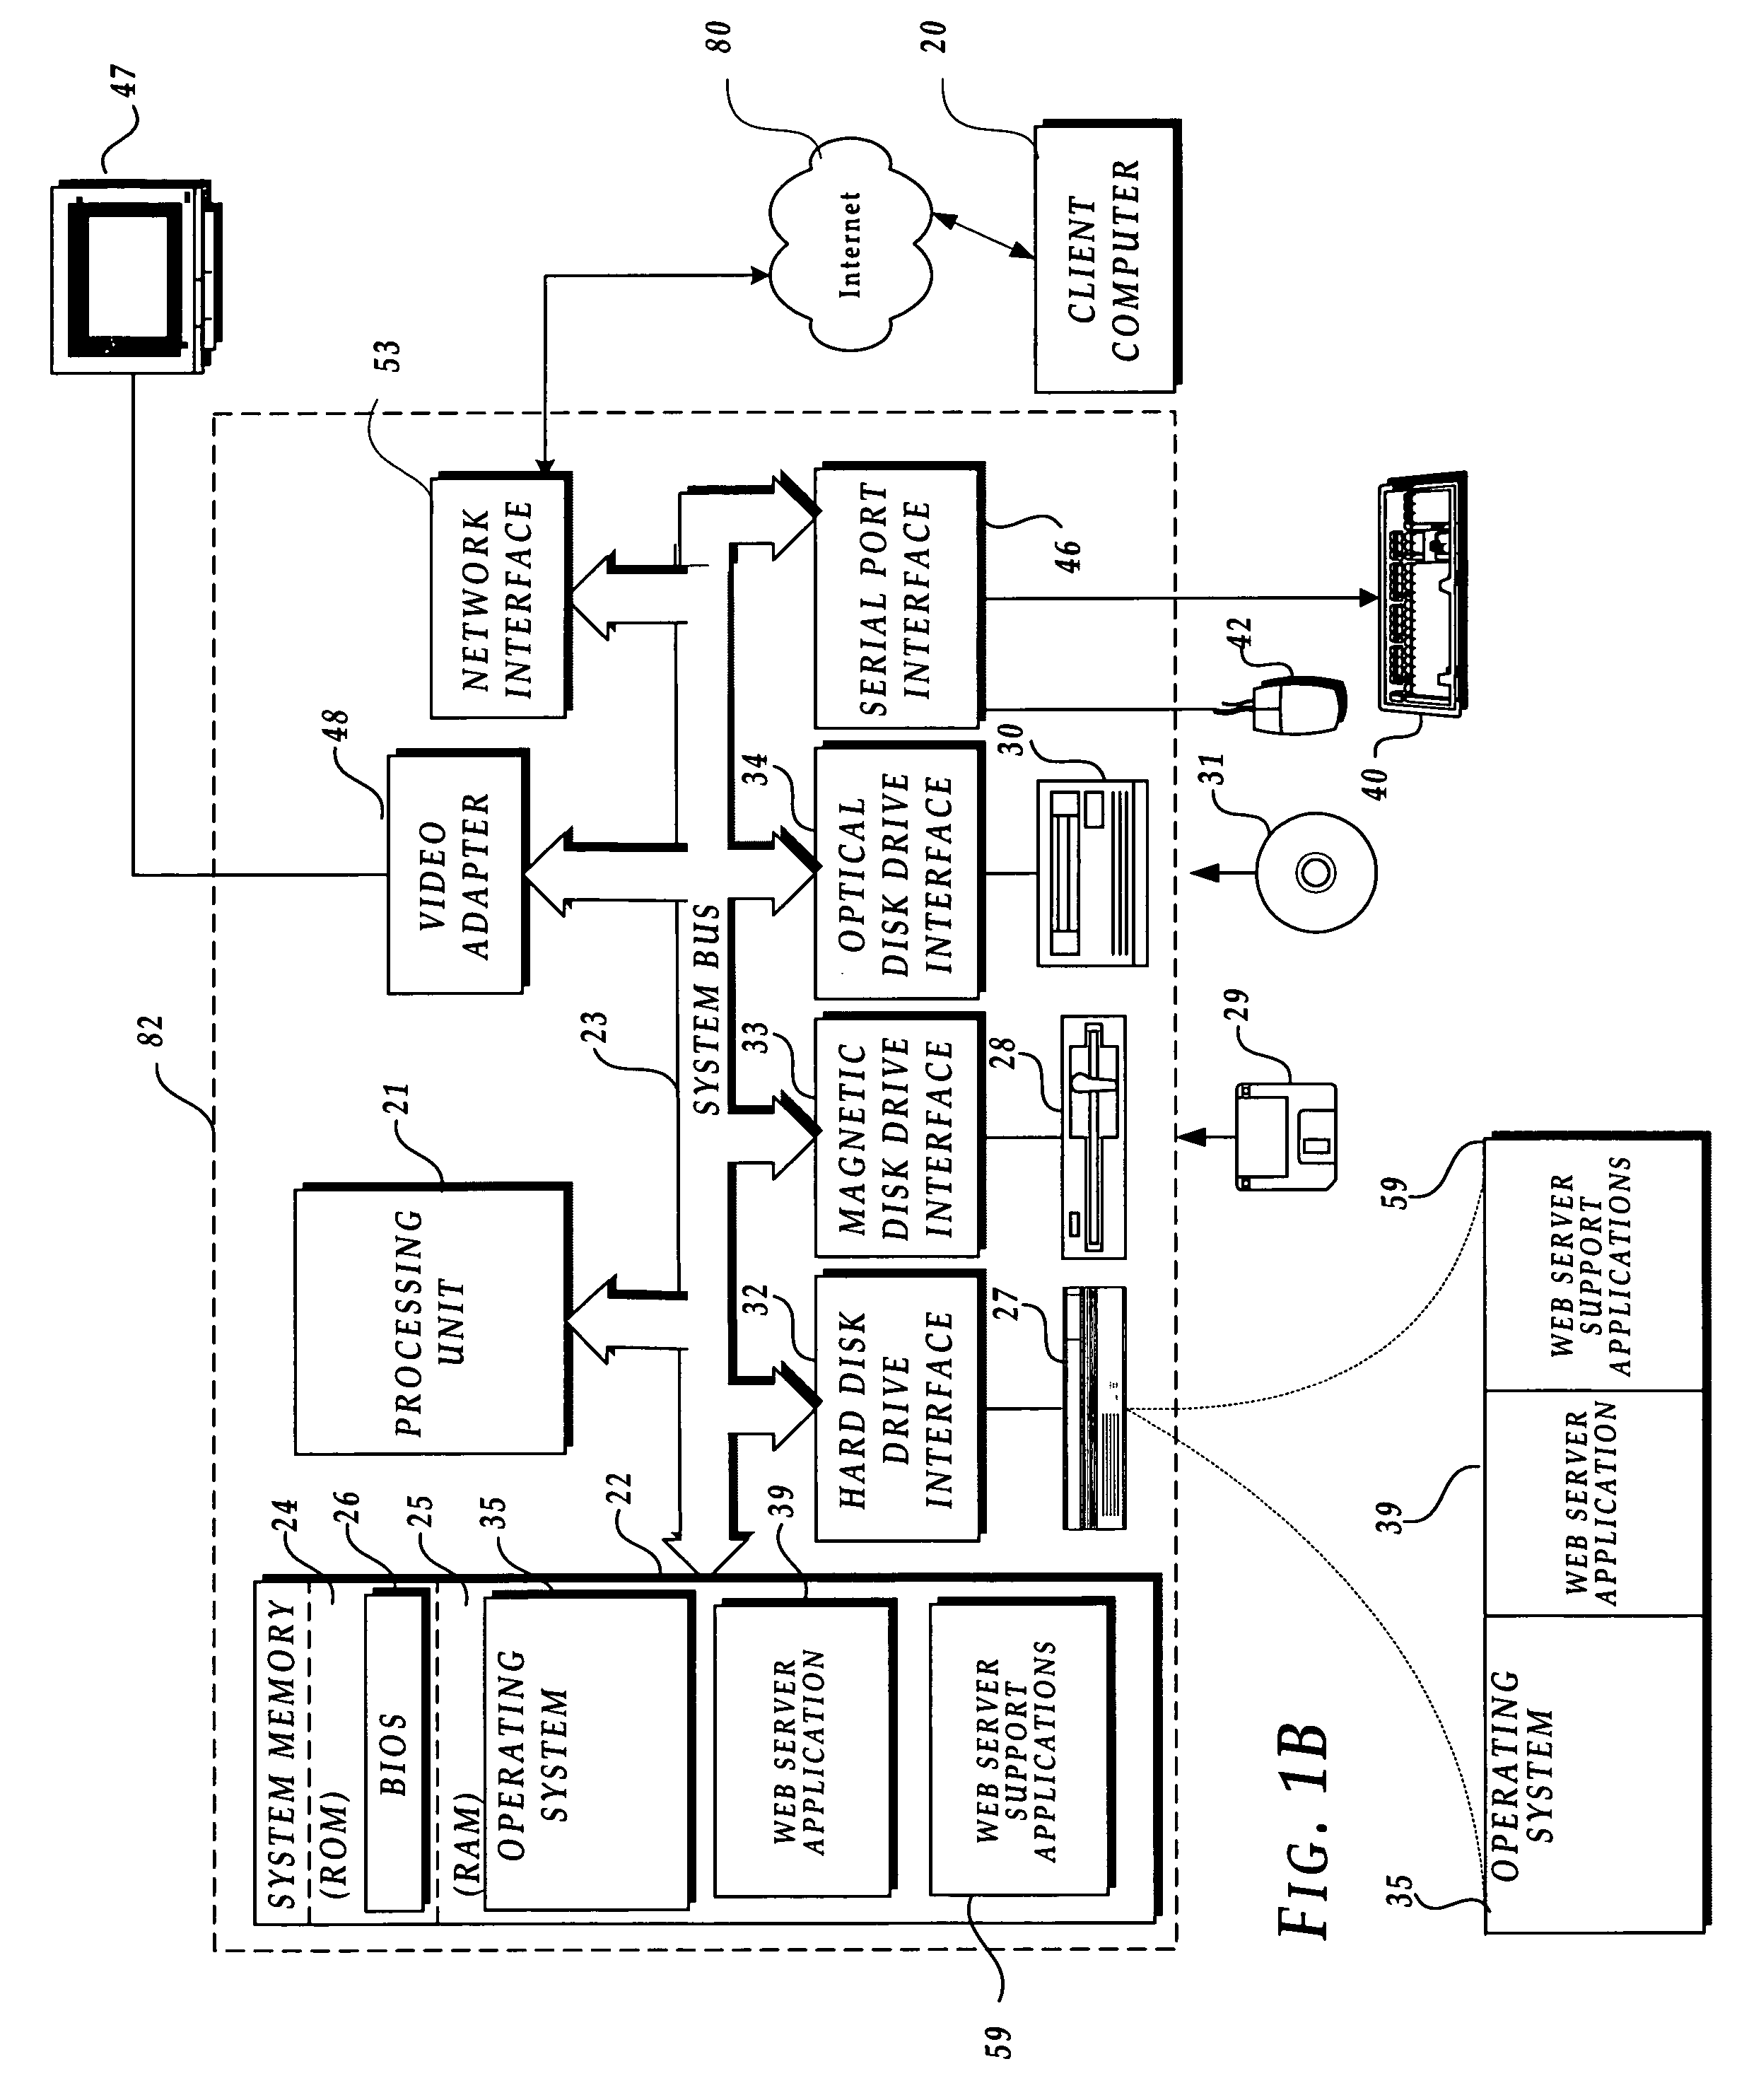 System and method for synchronizing multiple database files